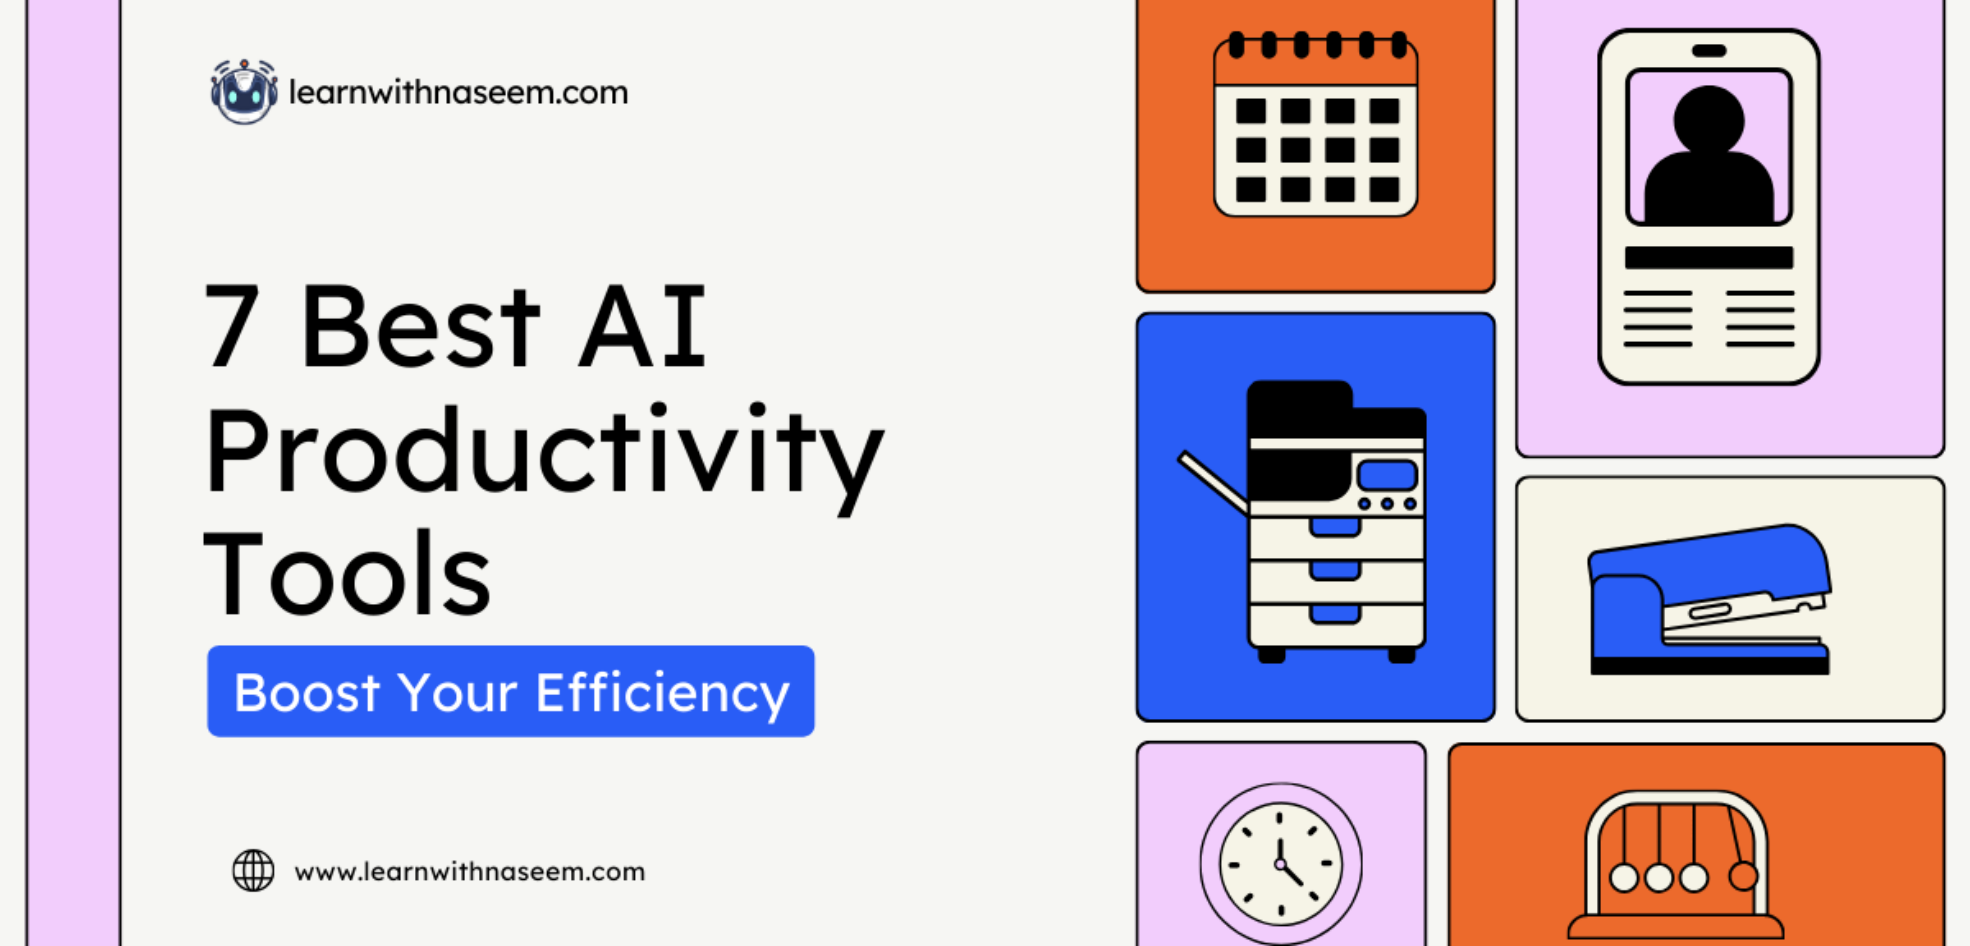 ai productivity tools, organize your notes, ai tools, image to text, write better emails